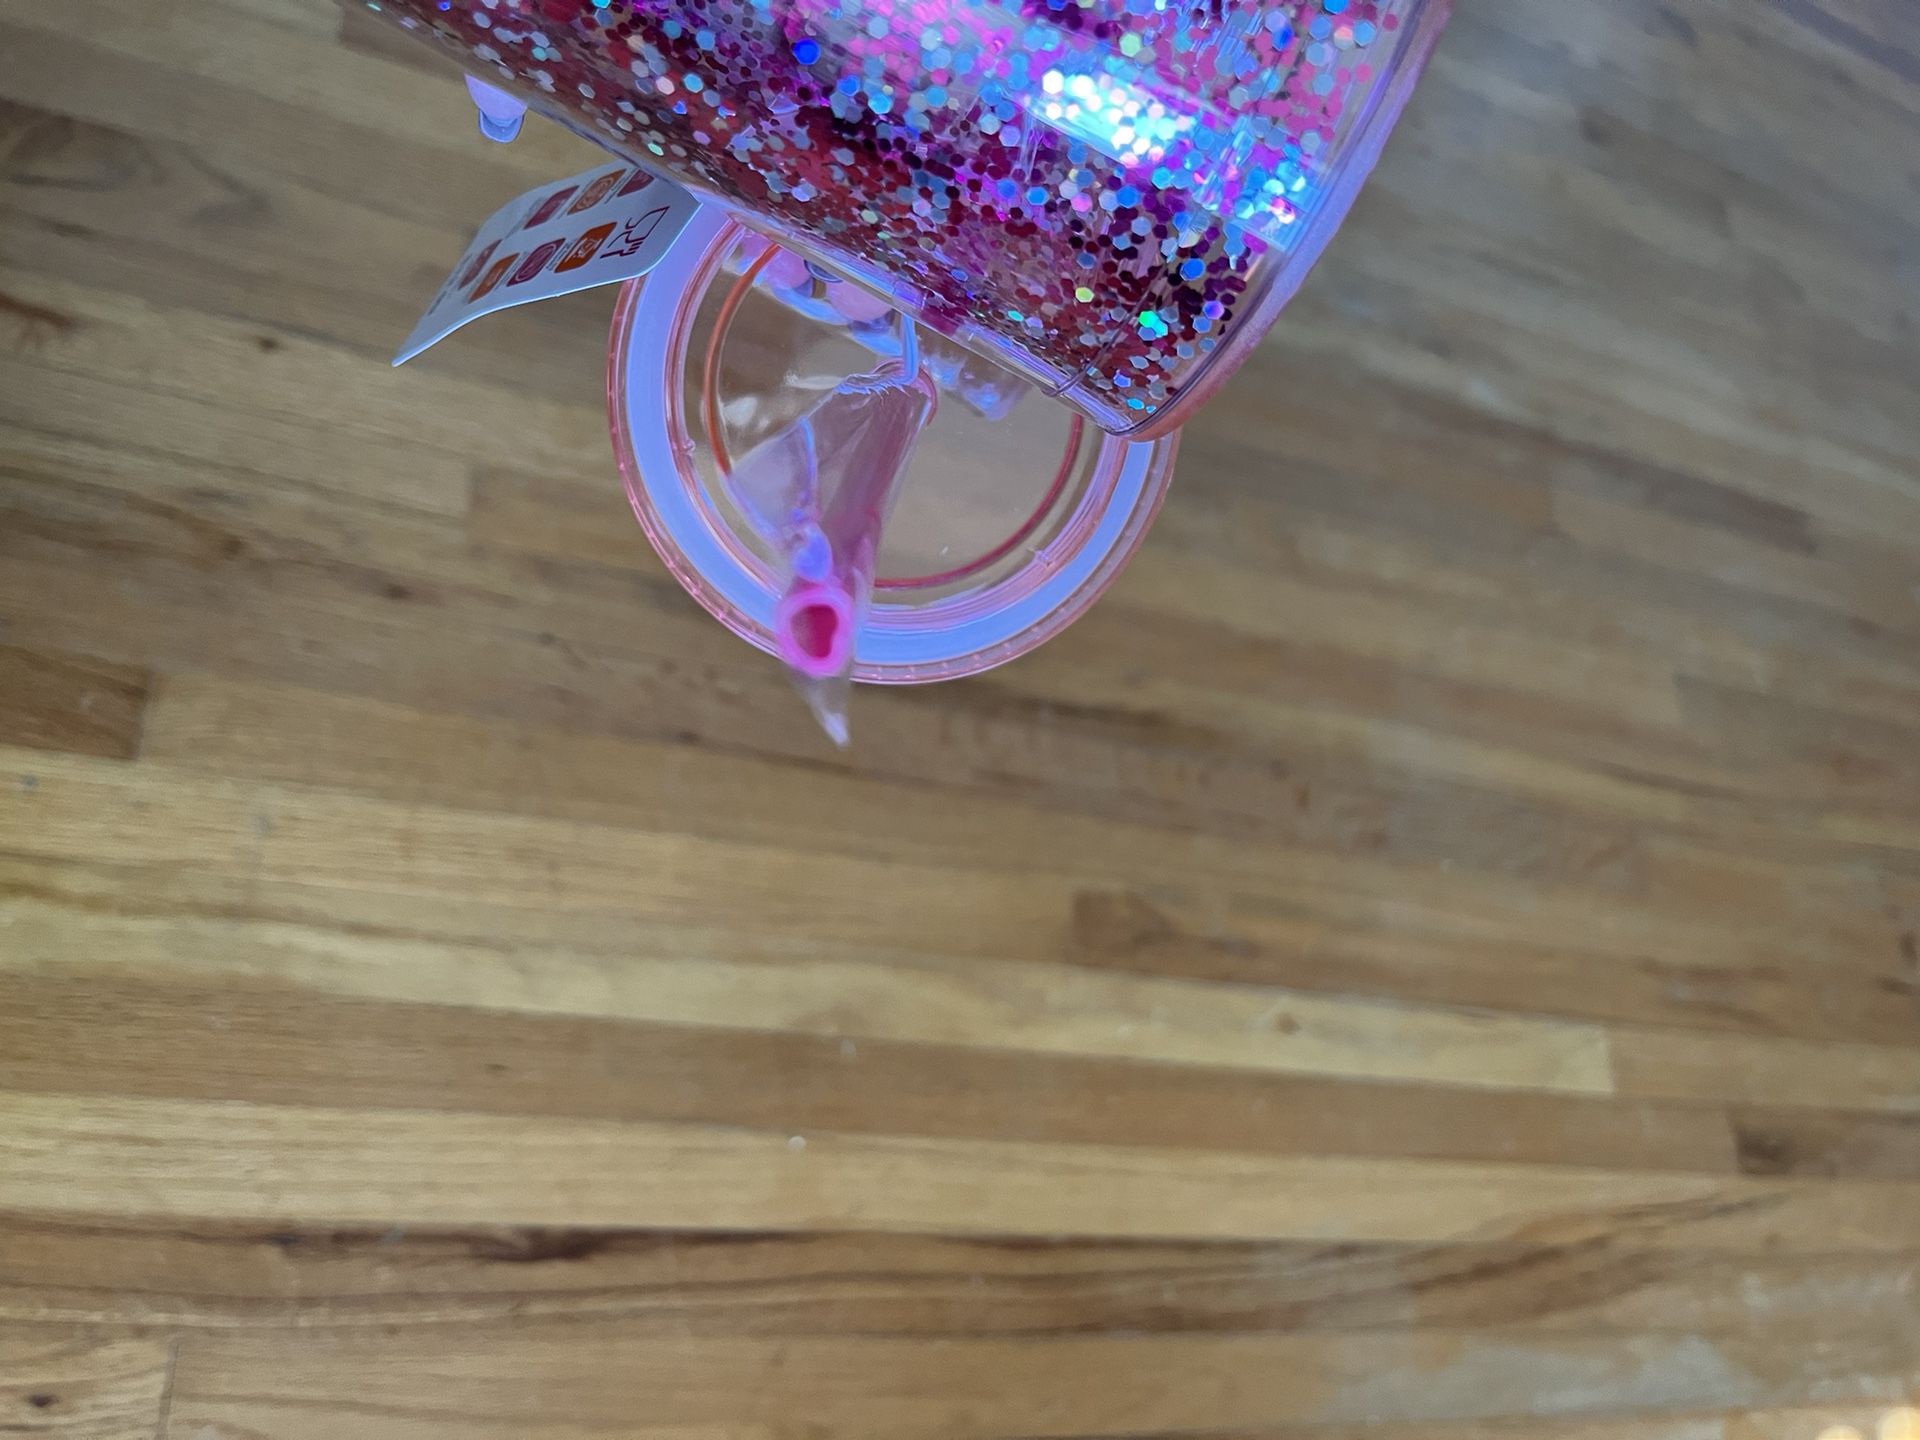 Dunkin Donuts 2023 Valentines Tumbler Pink for Sale in Lynwood, CA - OfferUp